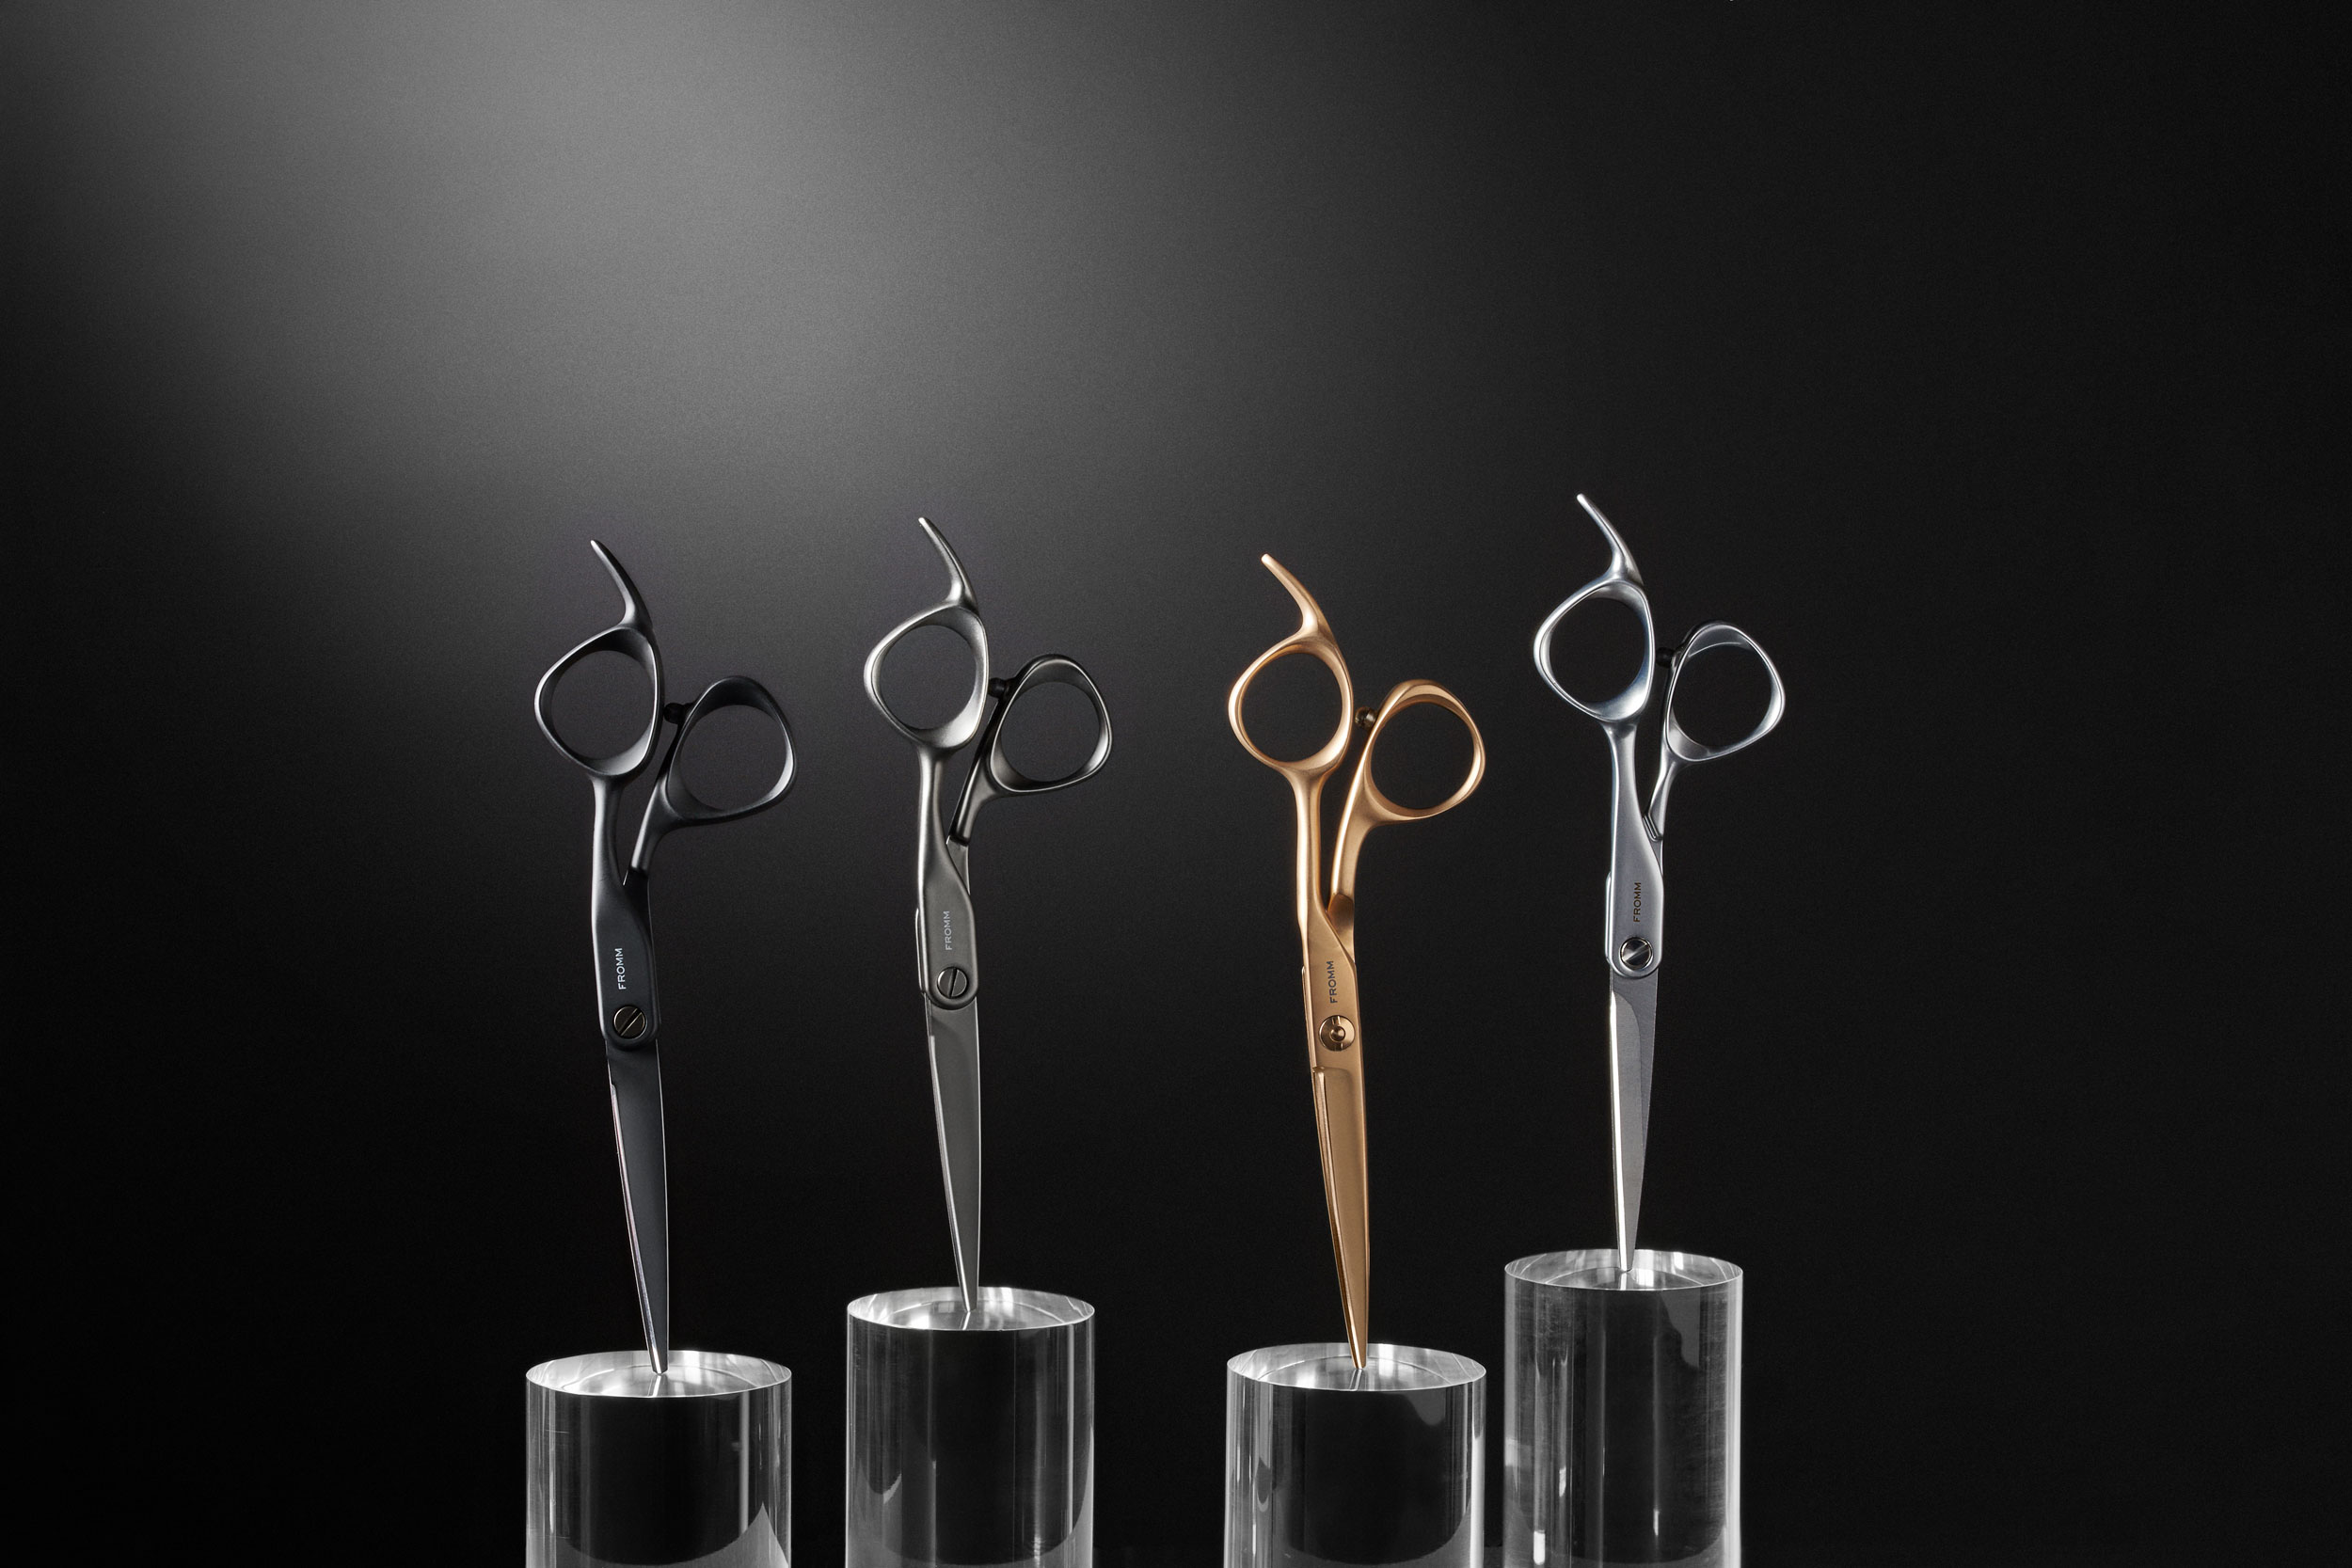 Four hair cutting sheers suspended on clear cylinders